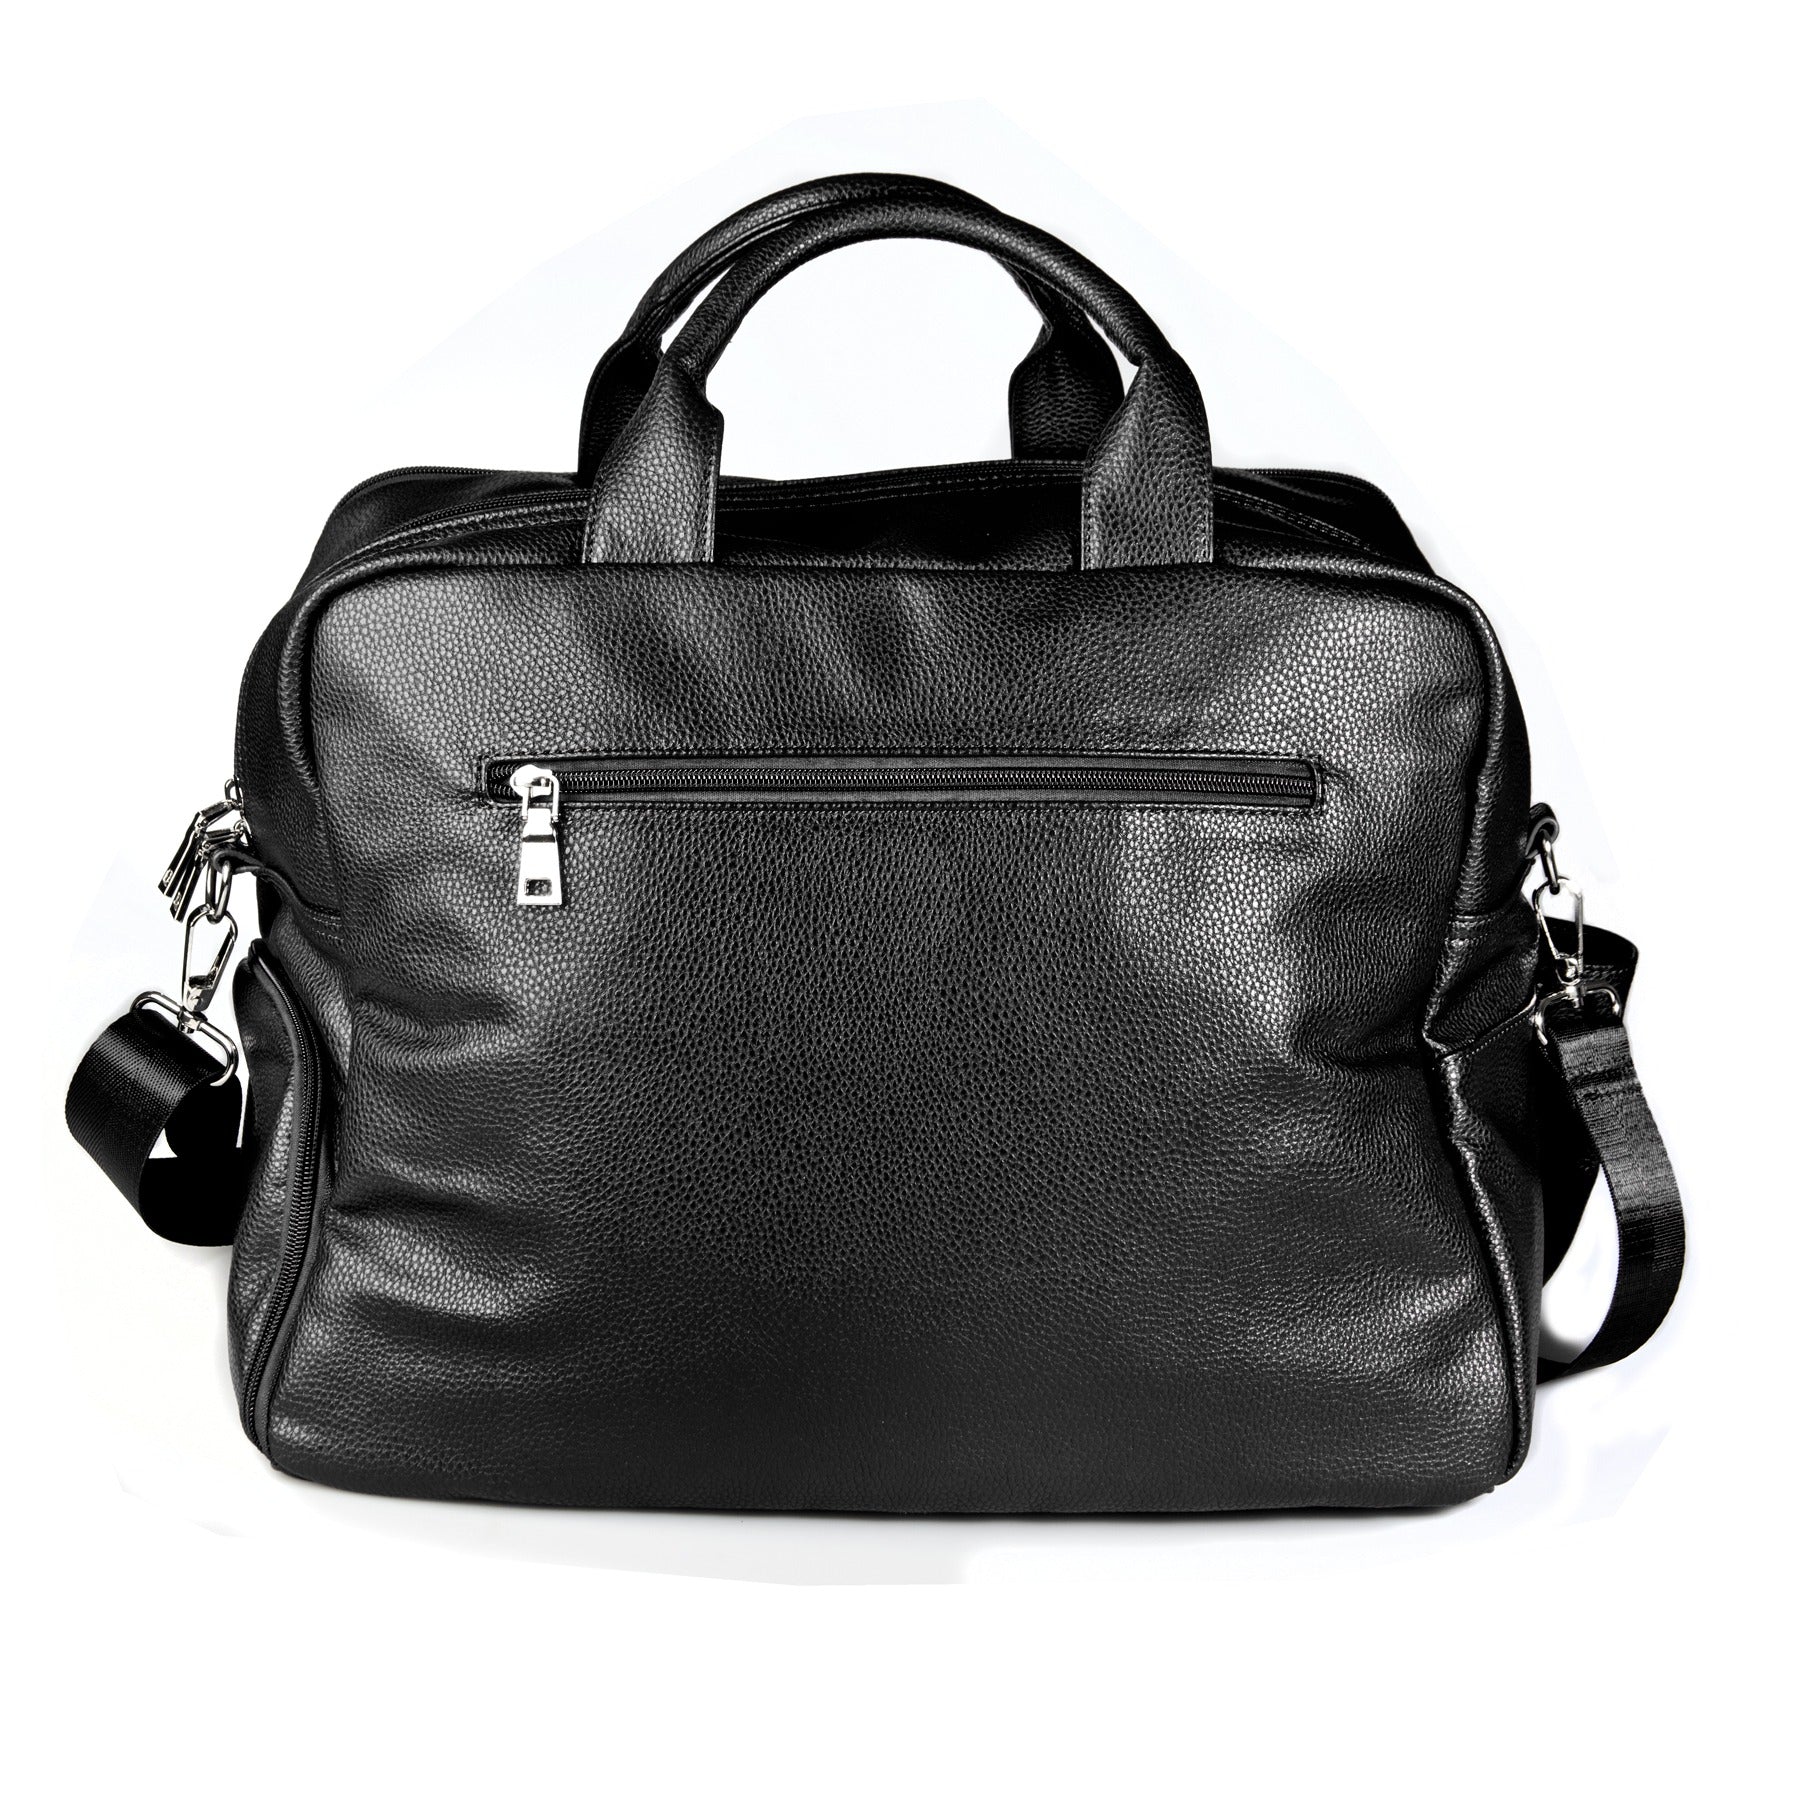 Hero Travel Bag Hayes Series 325bla Better Than Leather